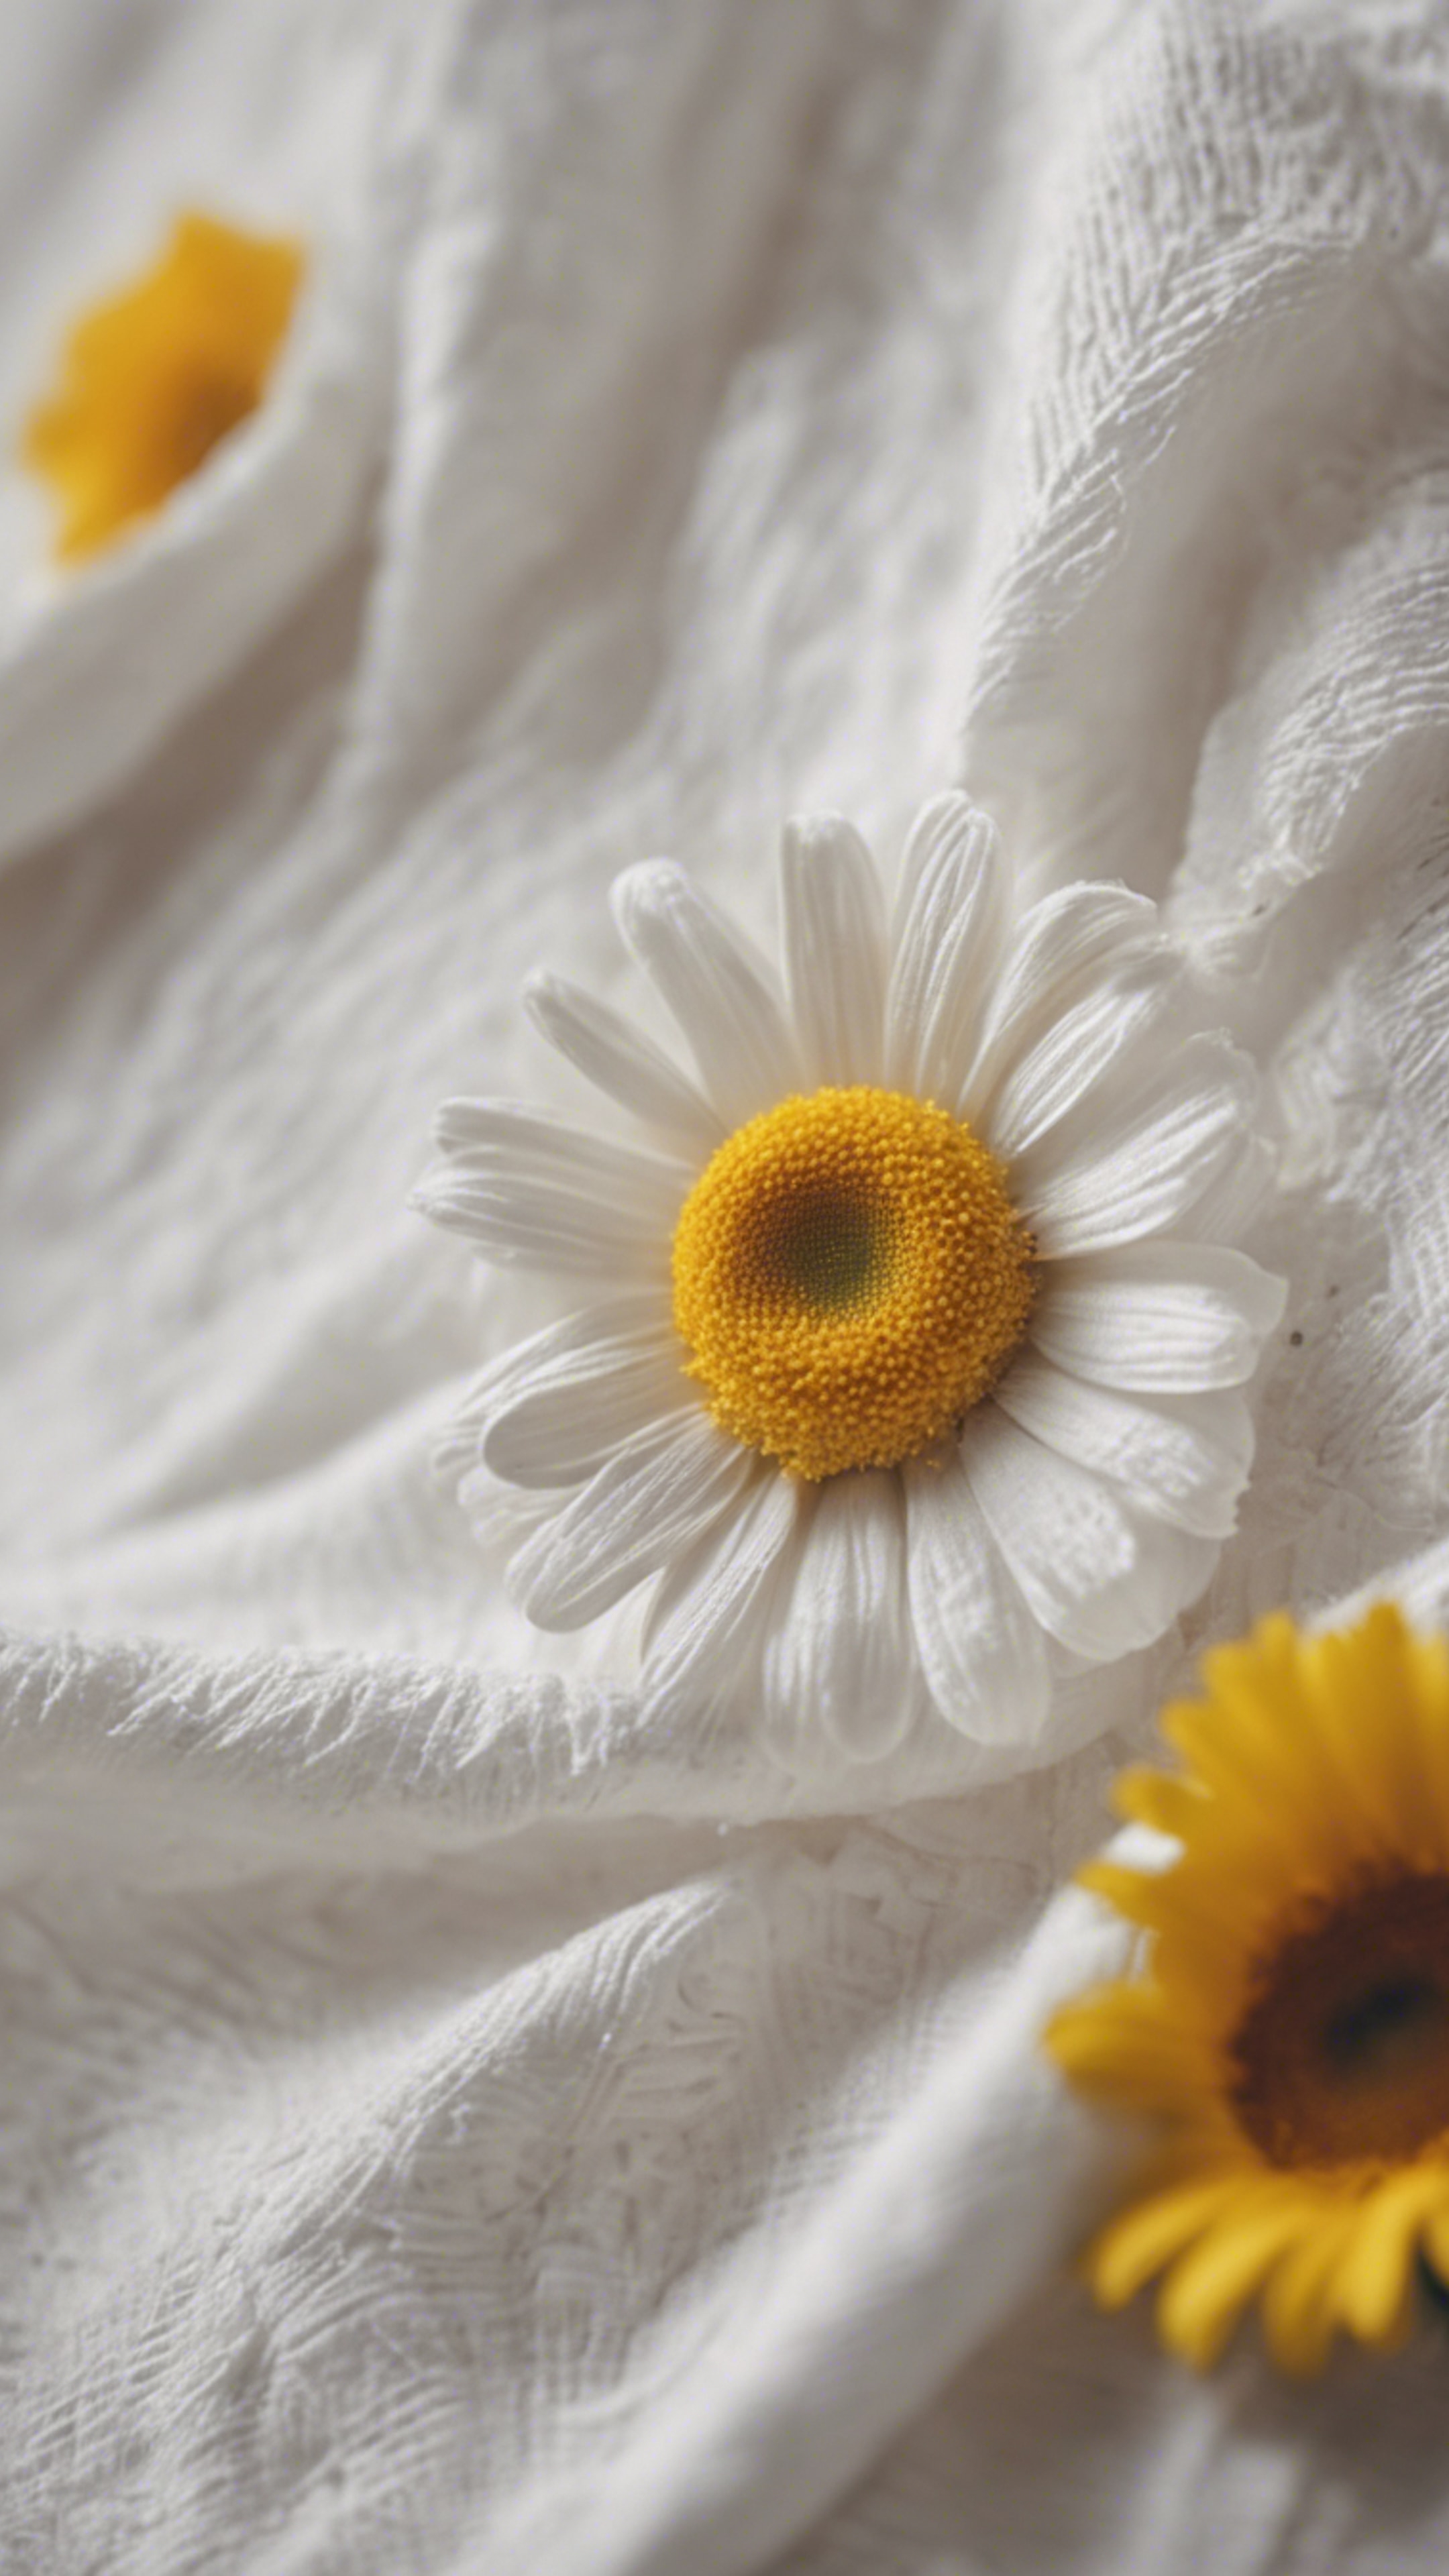 A white cotton dress with a daisy, featuring yellow petals and a white center. Wallpaper[81c17e18773146008e6c]